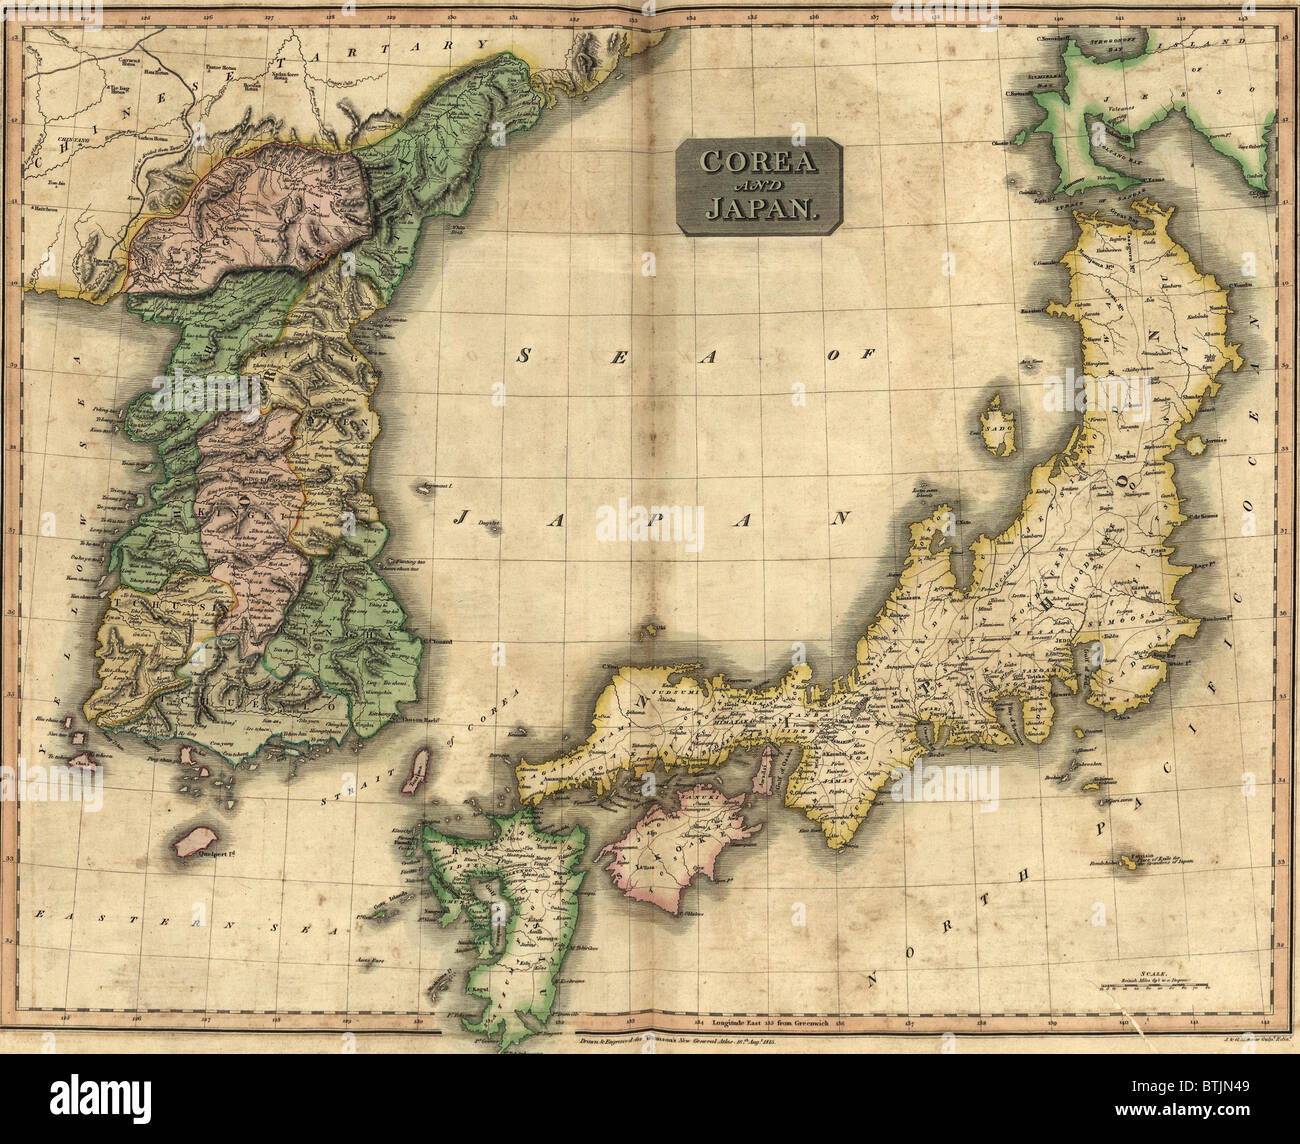 1815 map of Japan and Korea, showing their geographic proximity. Japan annexed Korea in 1905, and national independence returned only after World War 2. Stock Photo